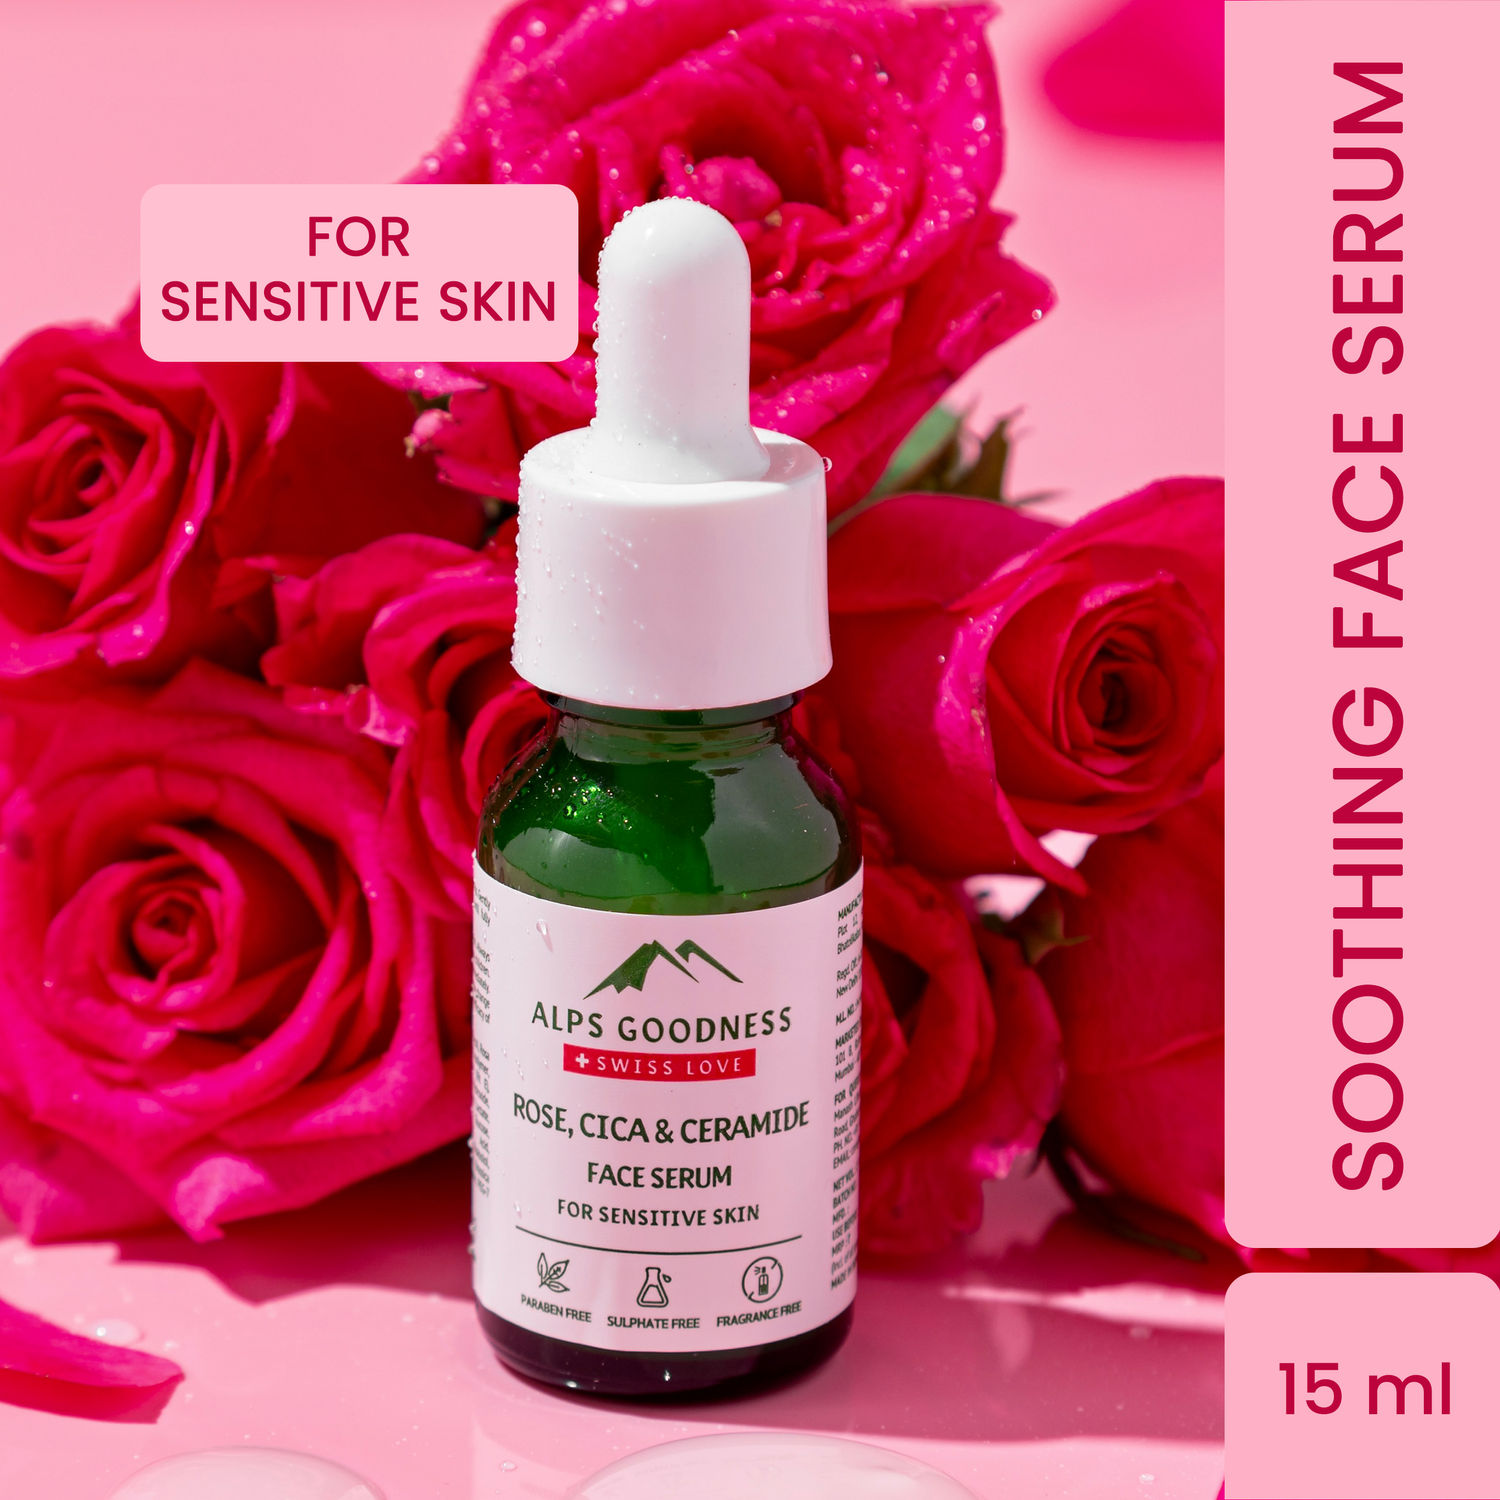 Buy Alps Goodness Rose, Cica & Ceramide Face Serum for Sensitive Skin (15 ml)| Paraben, Sulphate, Silicone, Mineral Oil Free| Vegan | Face Serum for Sensitive Skin | Sensitive Skin| Face Serum - Purplle